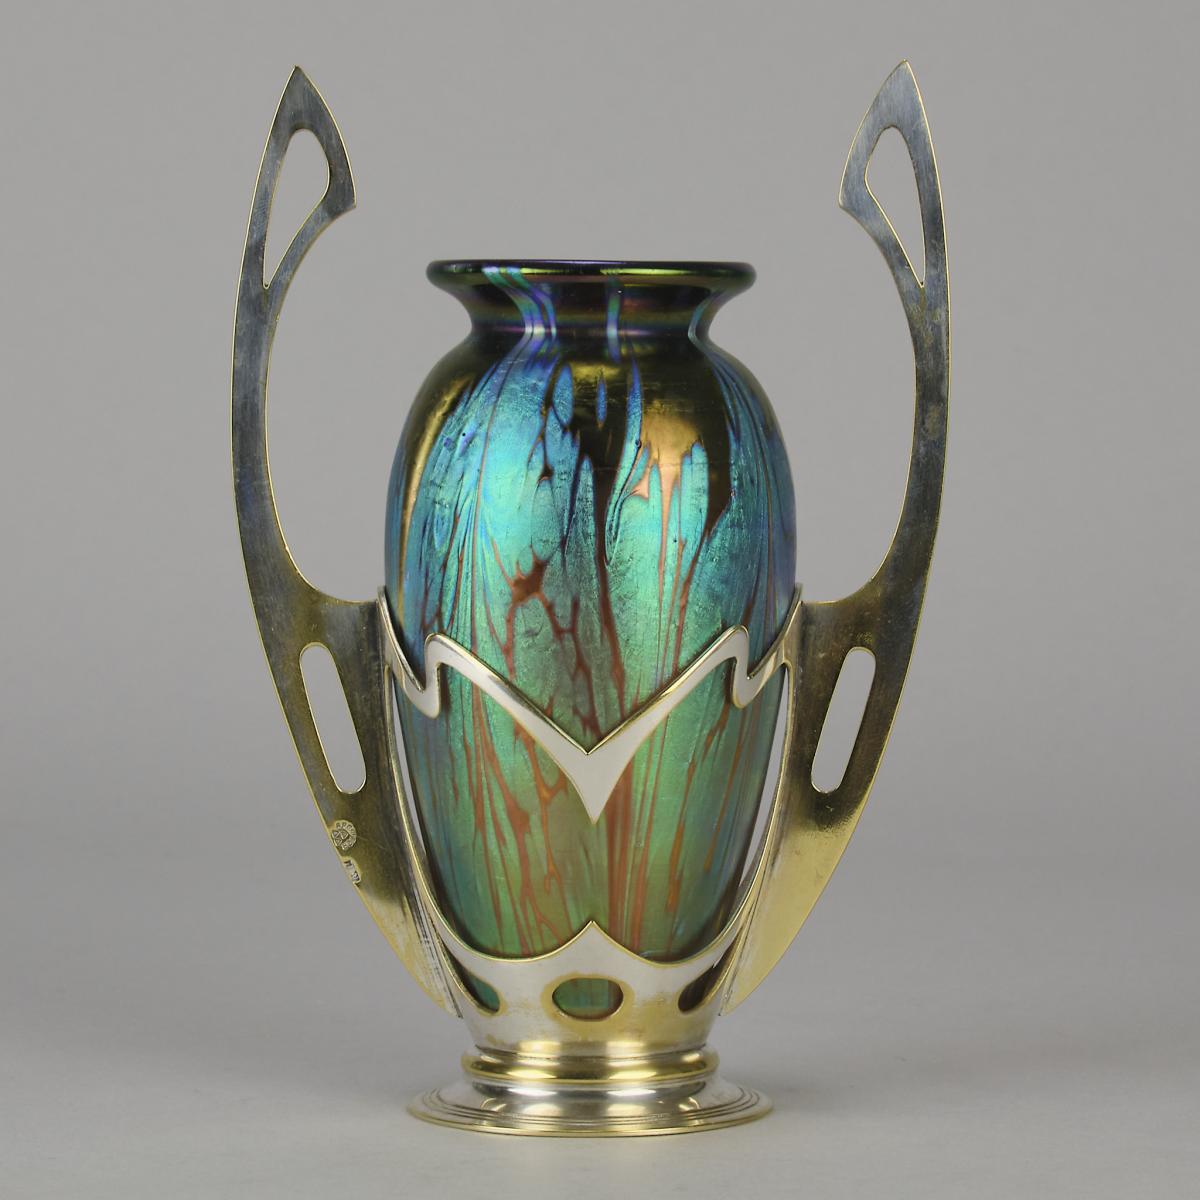 Early 20th Century Art Nouveau Vase entitled "Secessionist Vase" by Loetz Witwe